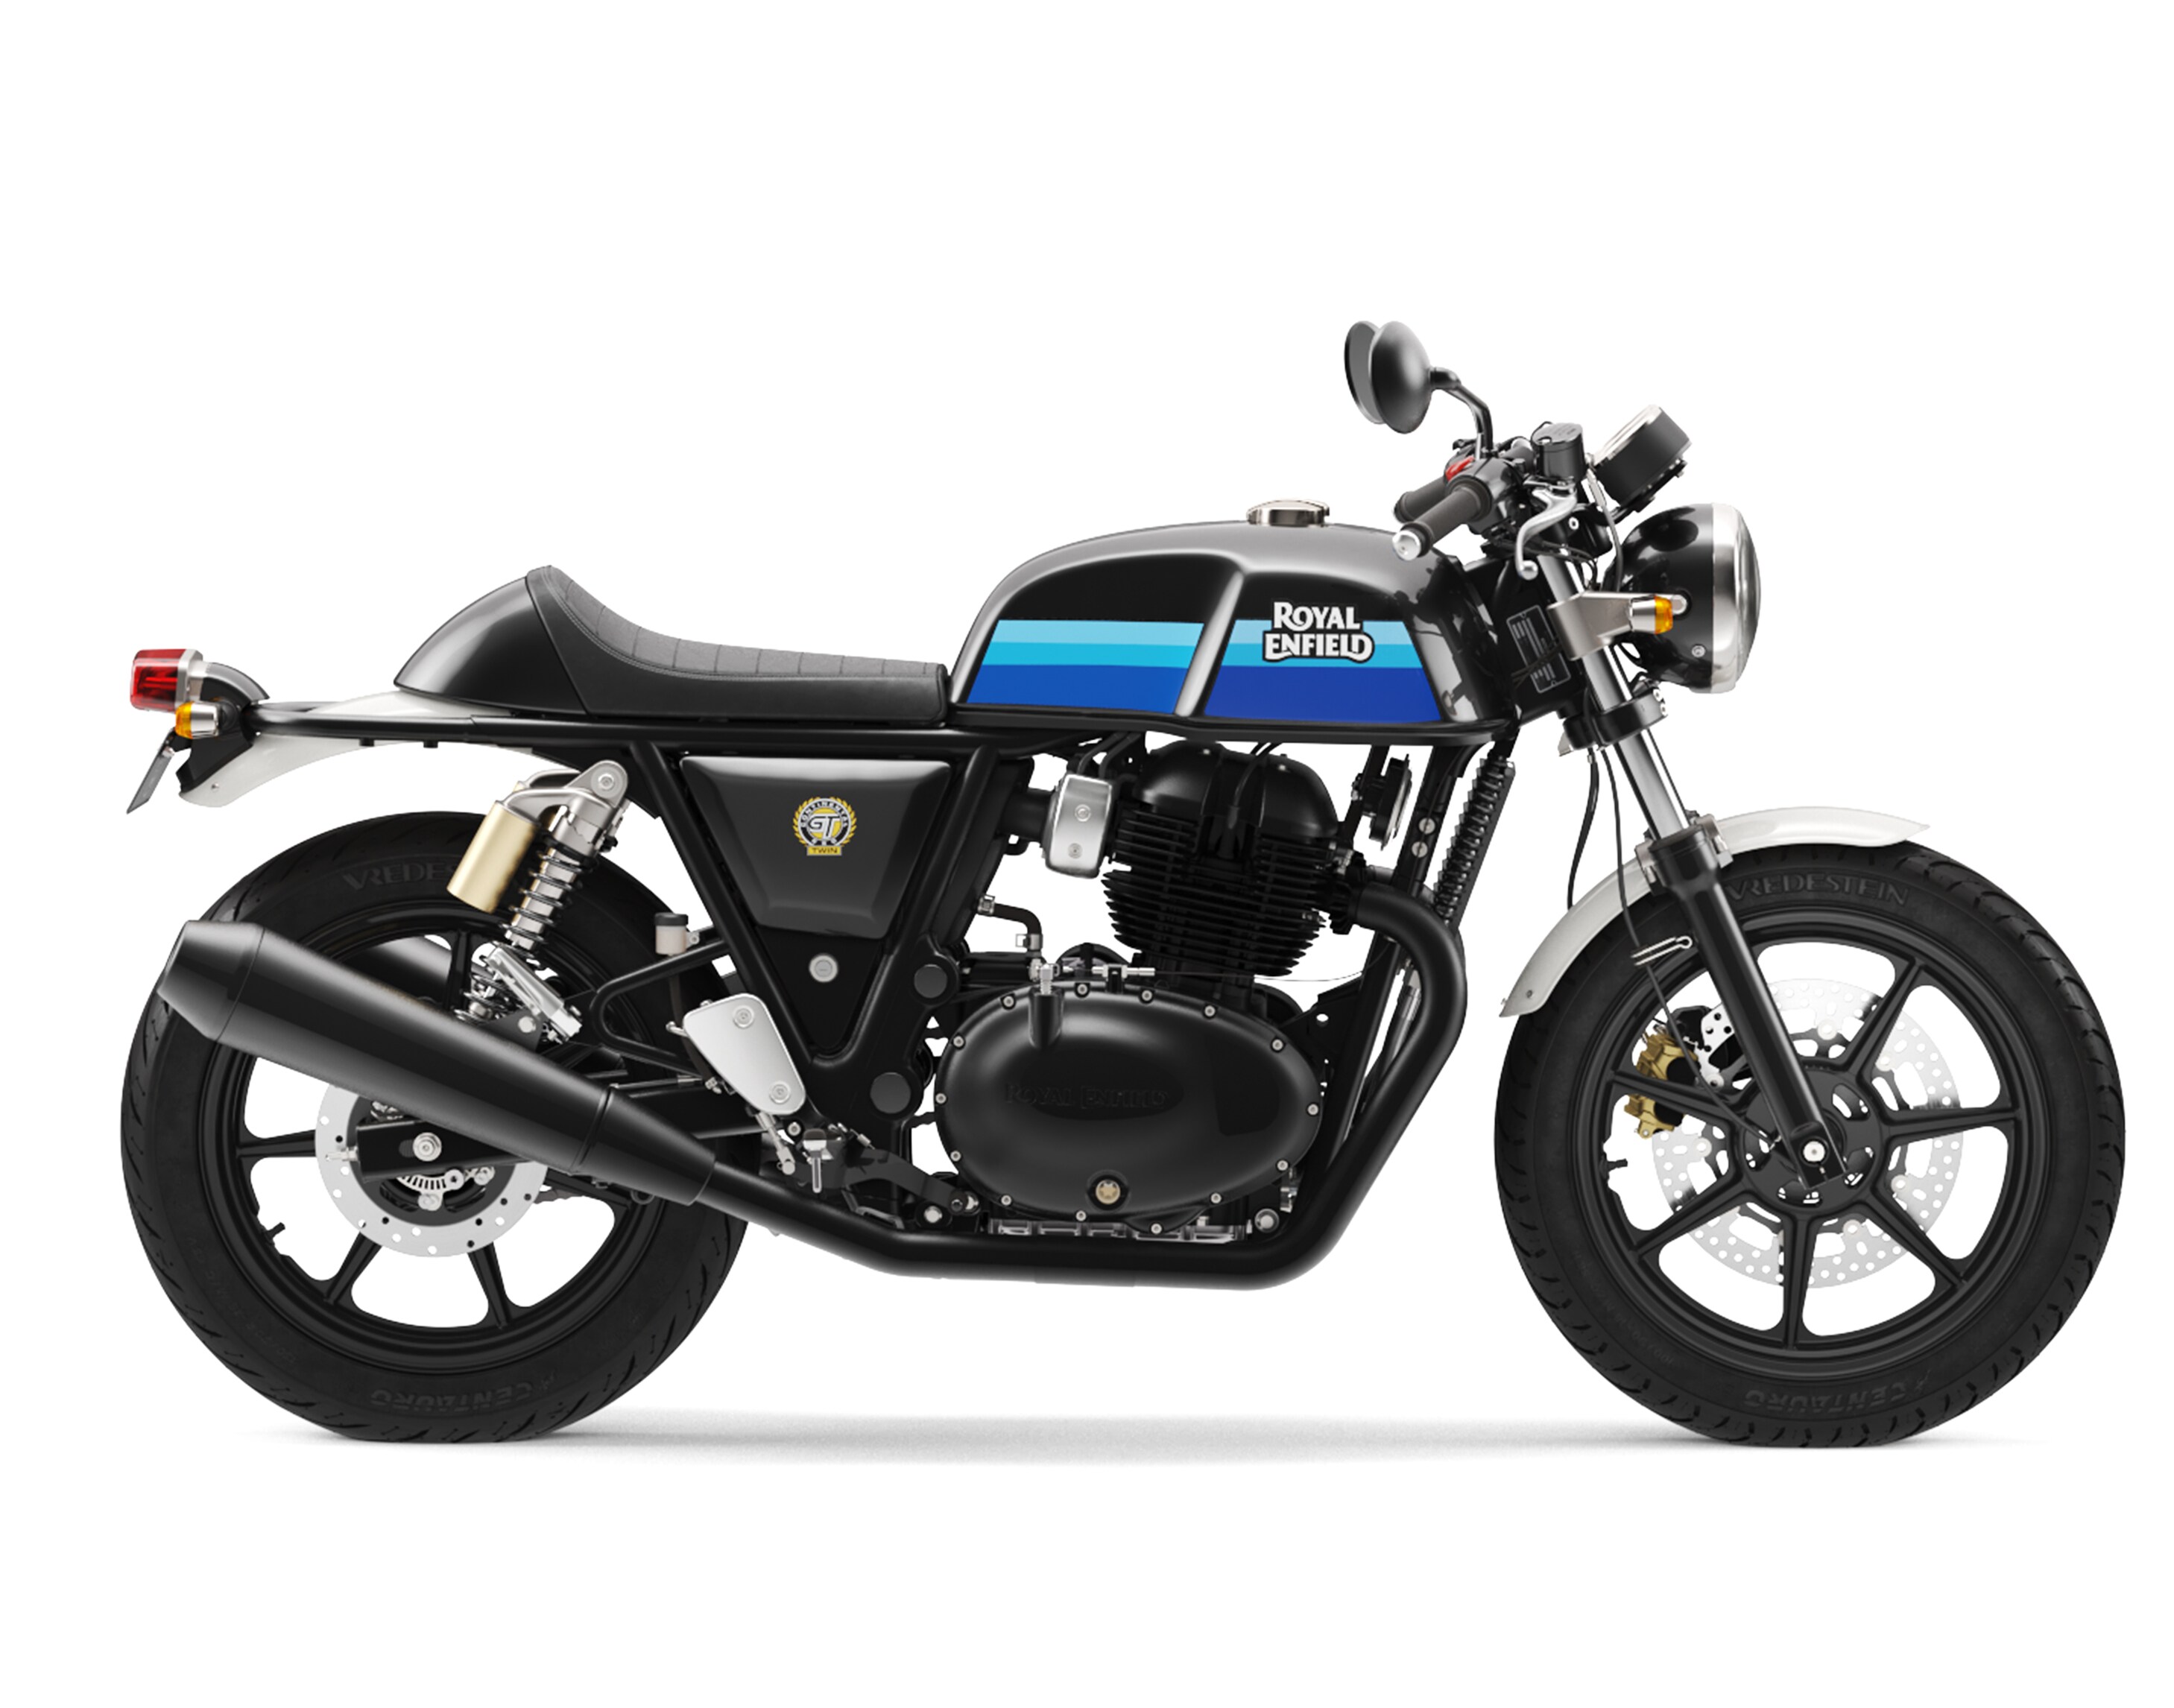 Royal Enfield Continental GT 650 Motorcycle